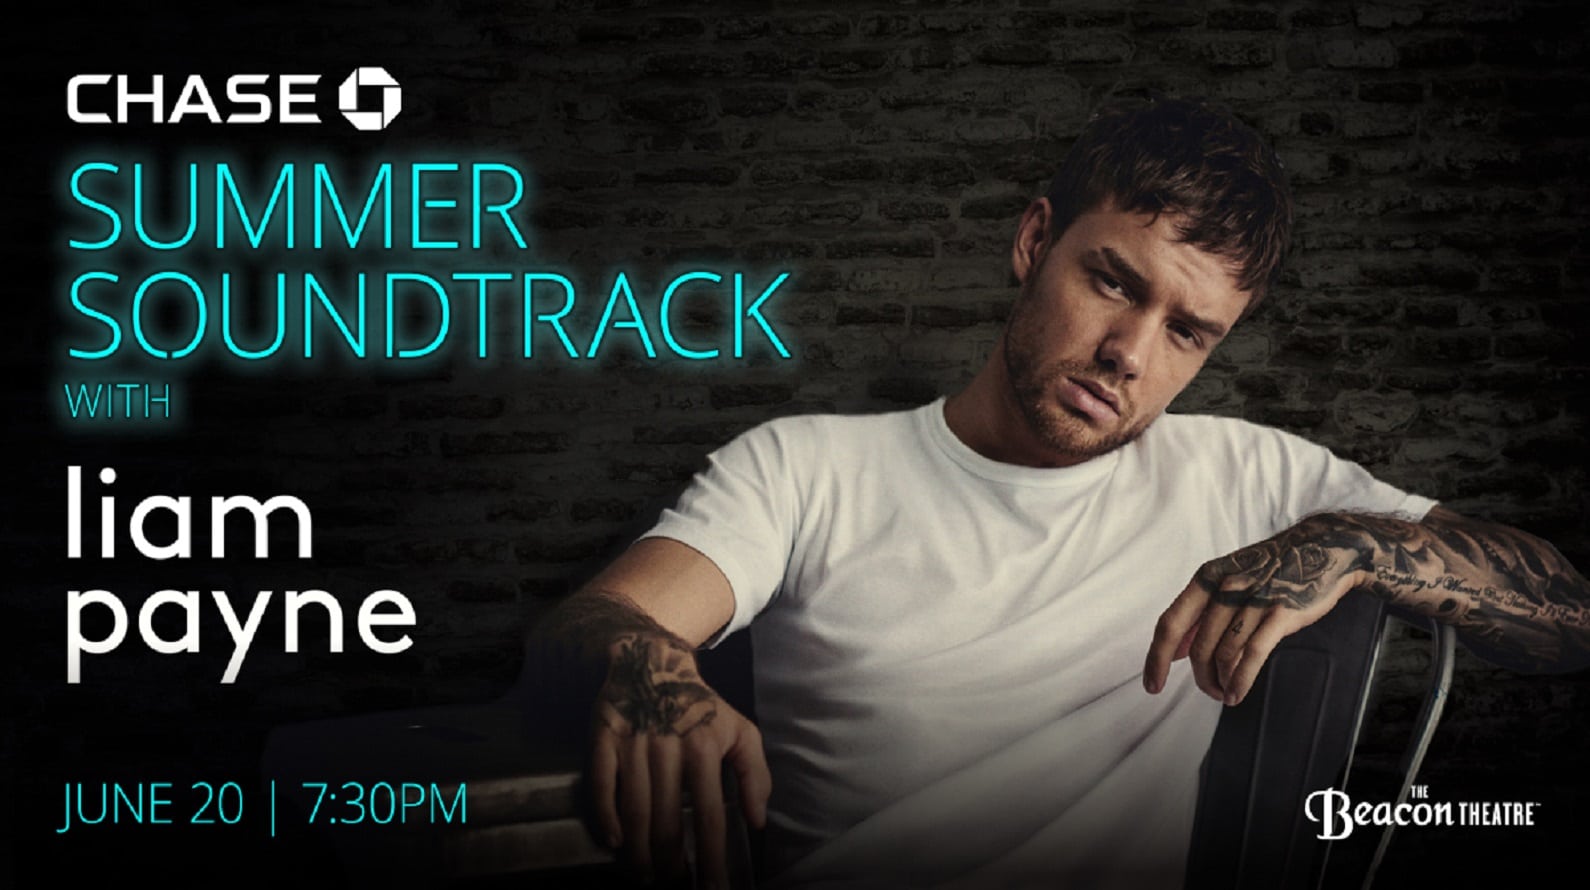 Chase Summer Soundtrack with Liam Payne at Beacon Theatre on 06-20-18